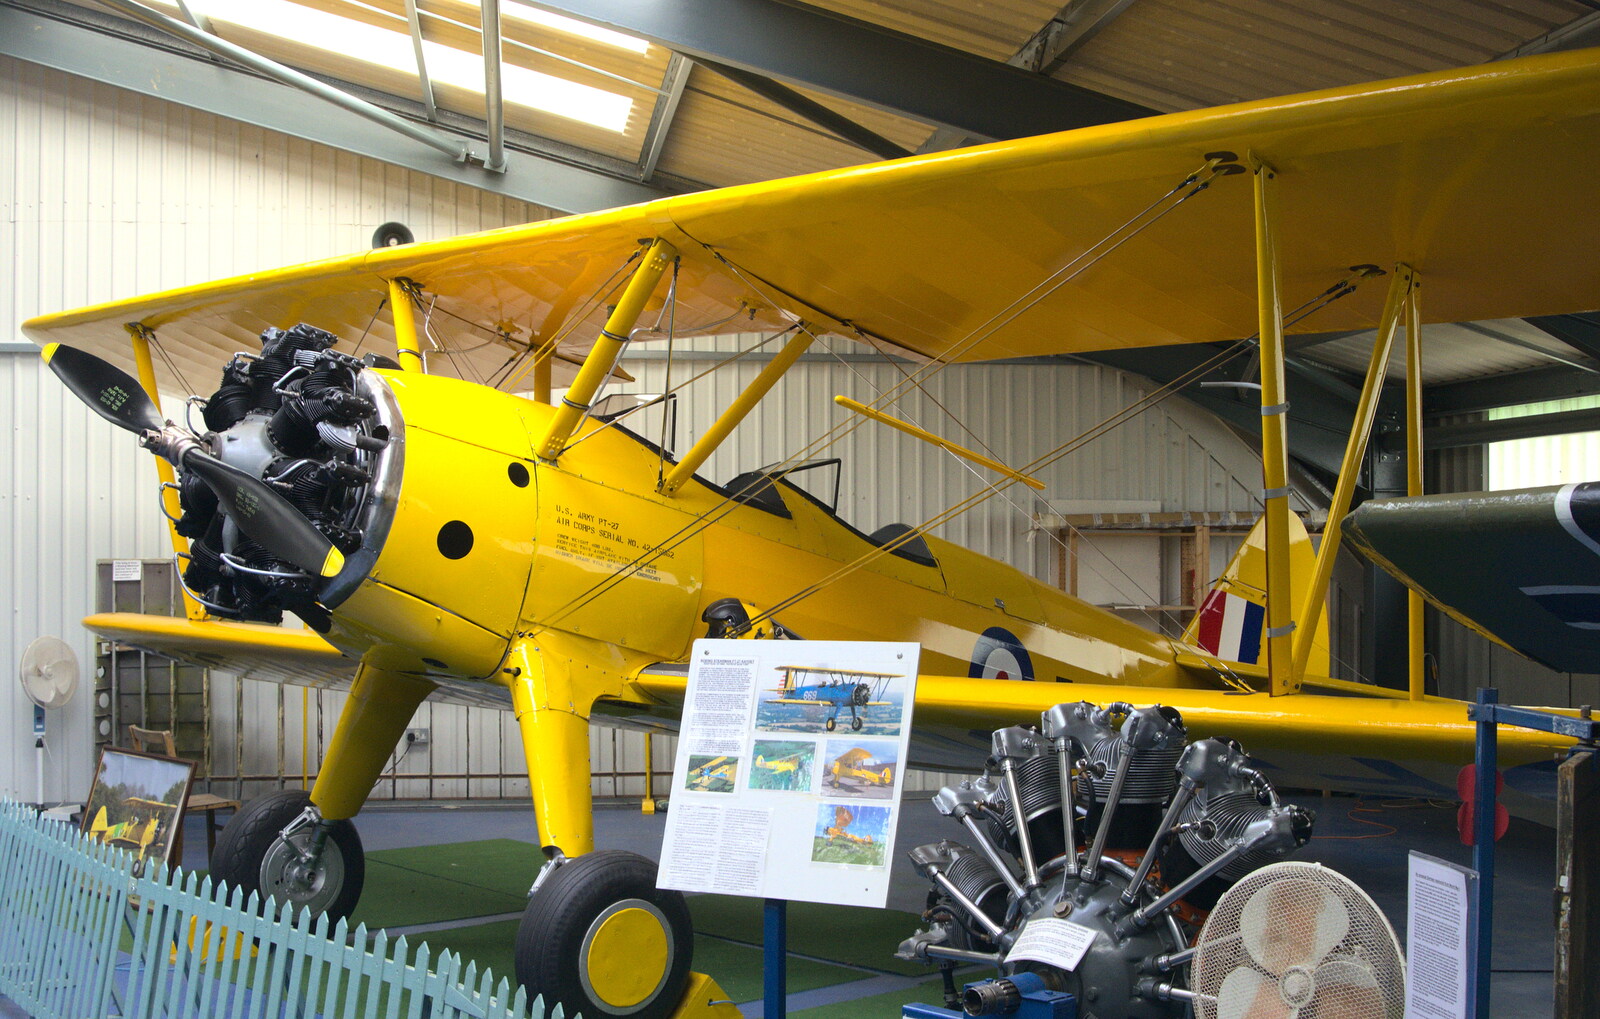 A US Army Air Corps Stearman from Norfolk and Suffolk Aviation Museum, Flixton, Suffolk - 30th April 2017